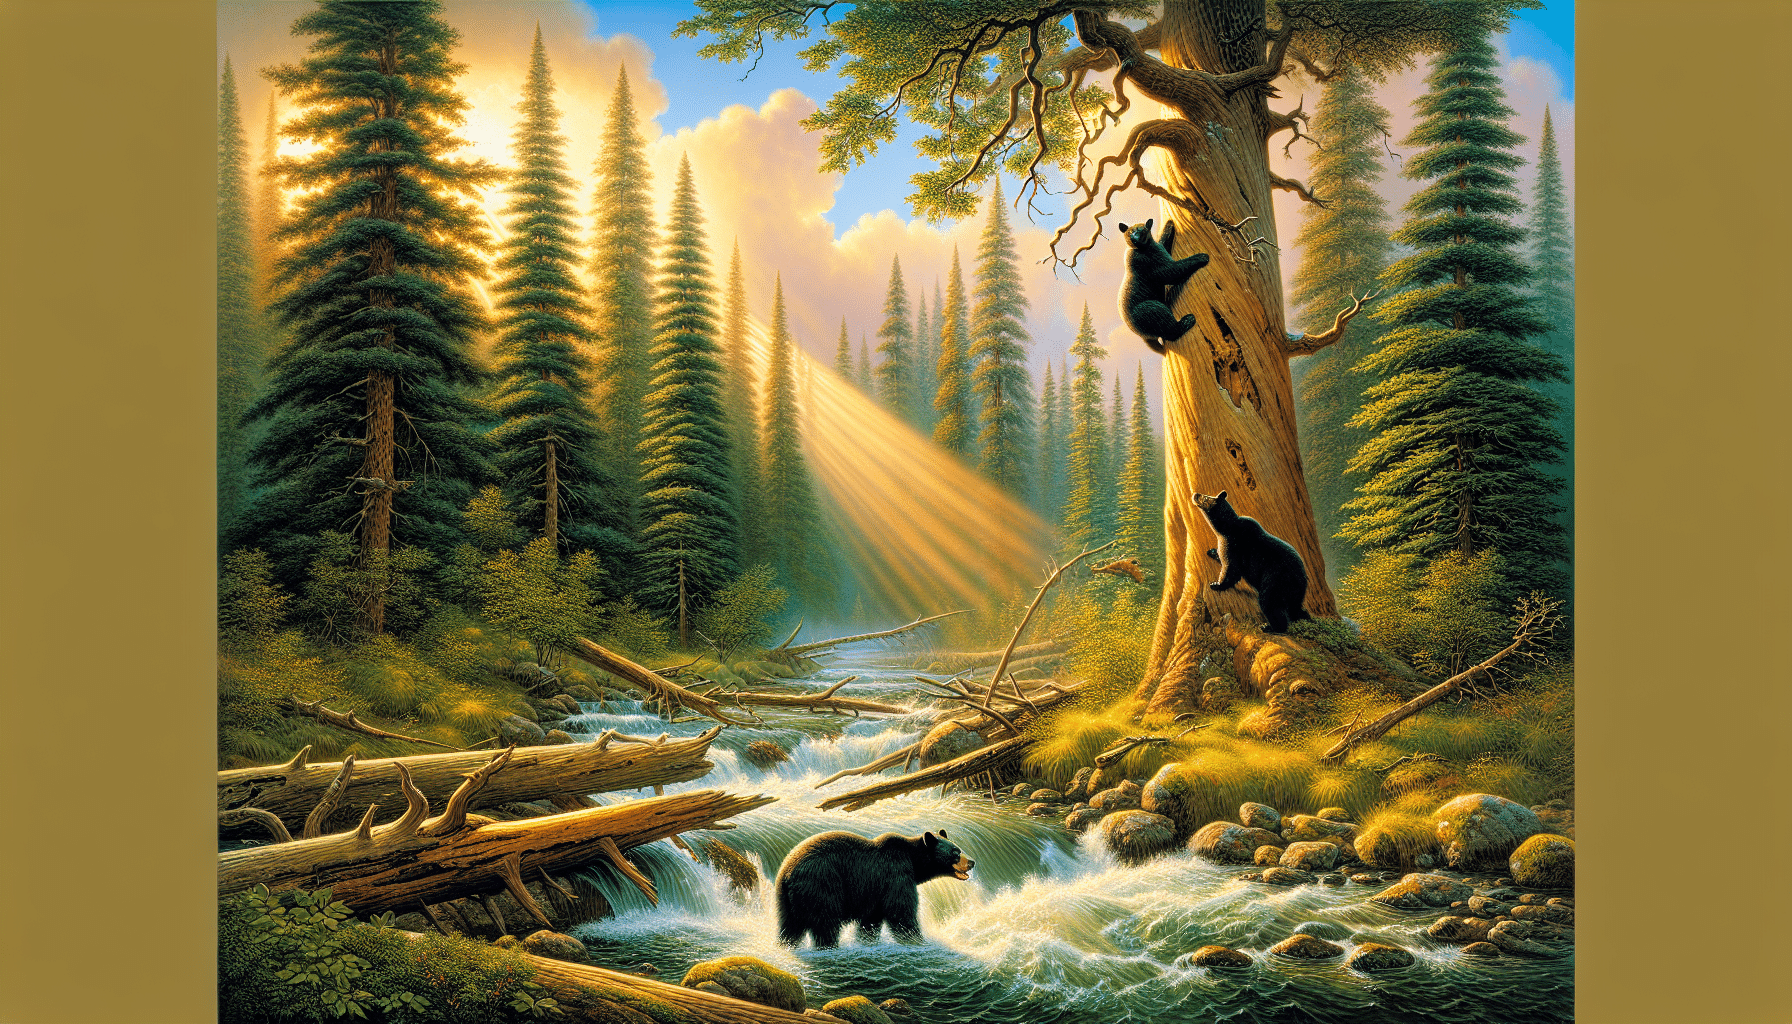 A serene forest scene depicting the activity of black bears. In the foreground, one black bear is seen hunting for fish in a rushing river while another is climbing up a tall, old tree. To portray the time, the environment is drenched in golden sunlight, indicating late afternoon when black bears are most active. The landscape should be rich with luscious green foliage and towering trees, while the sky is adorned with wispy clouds. The image should be completely devoid of human elements or any textual content.